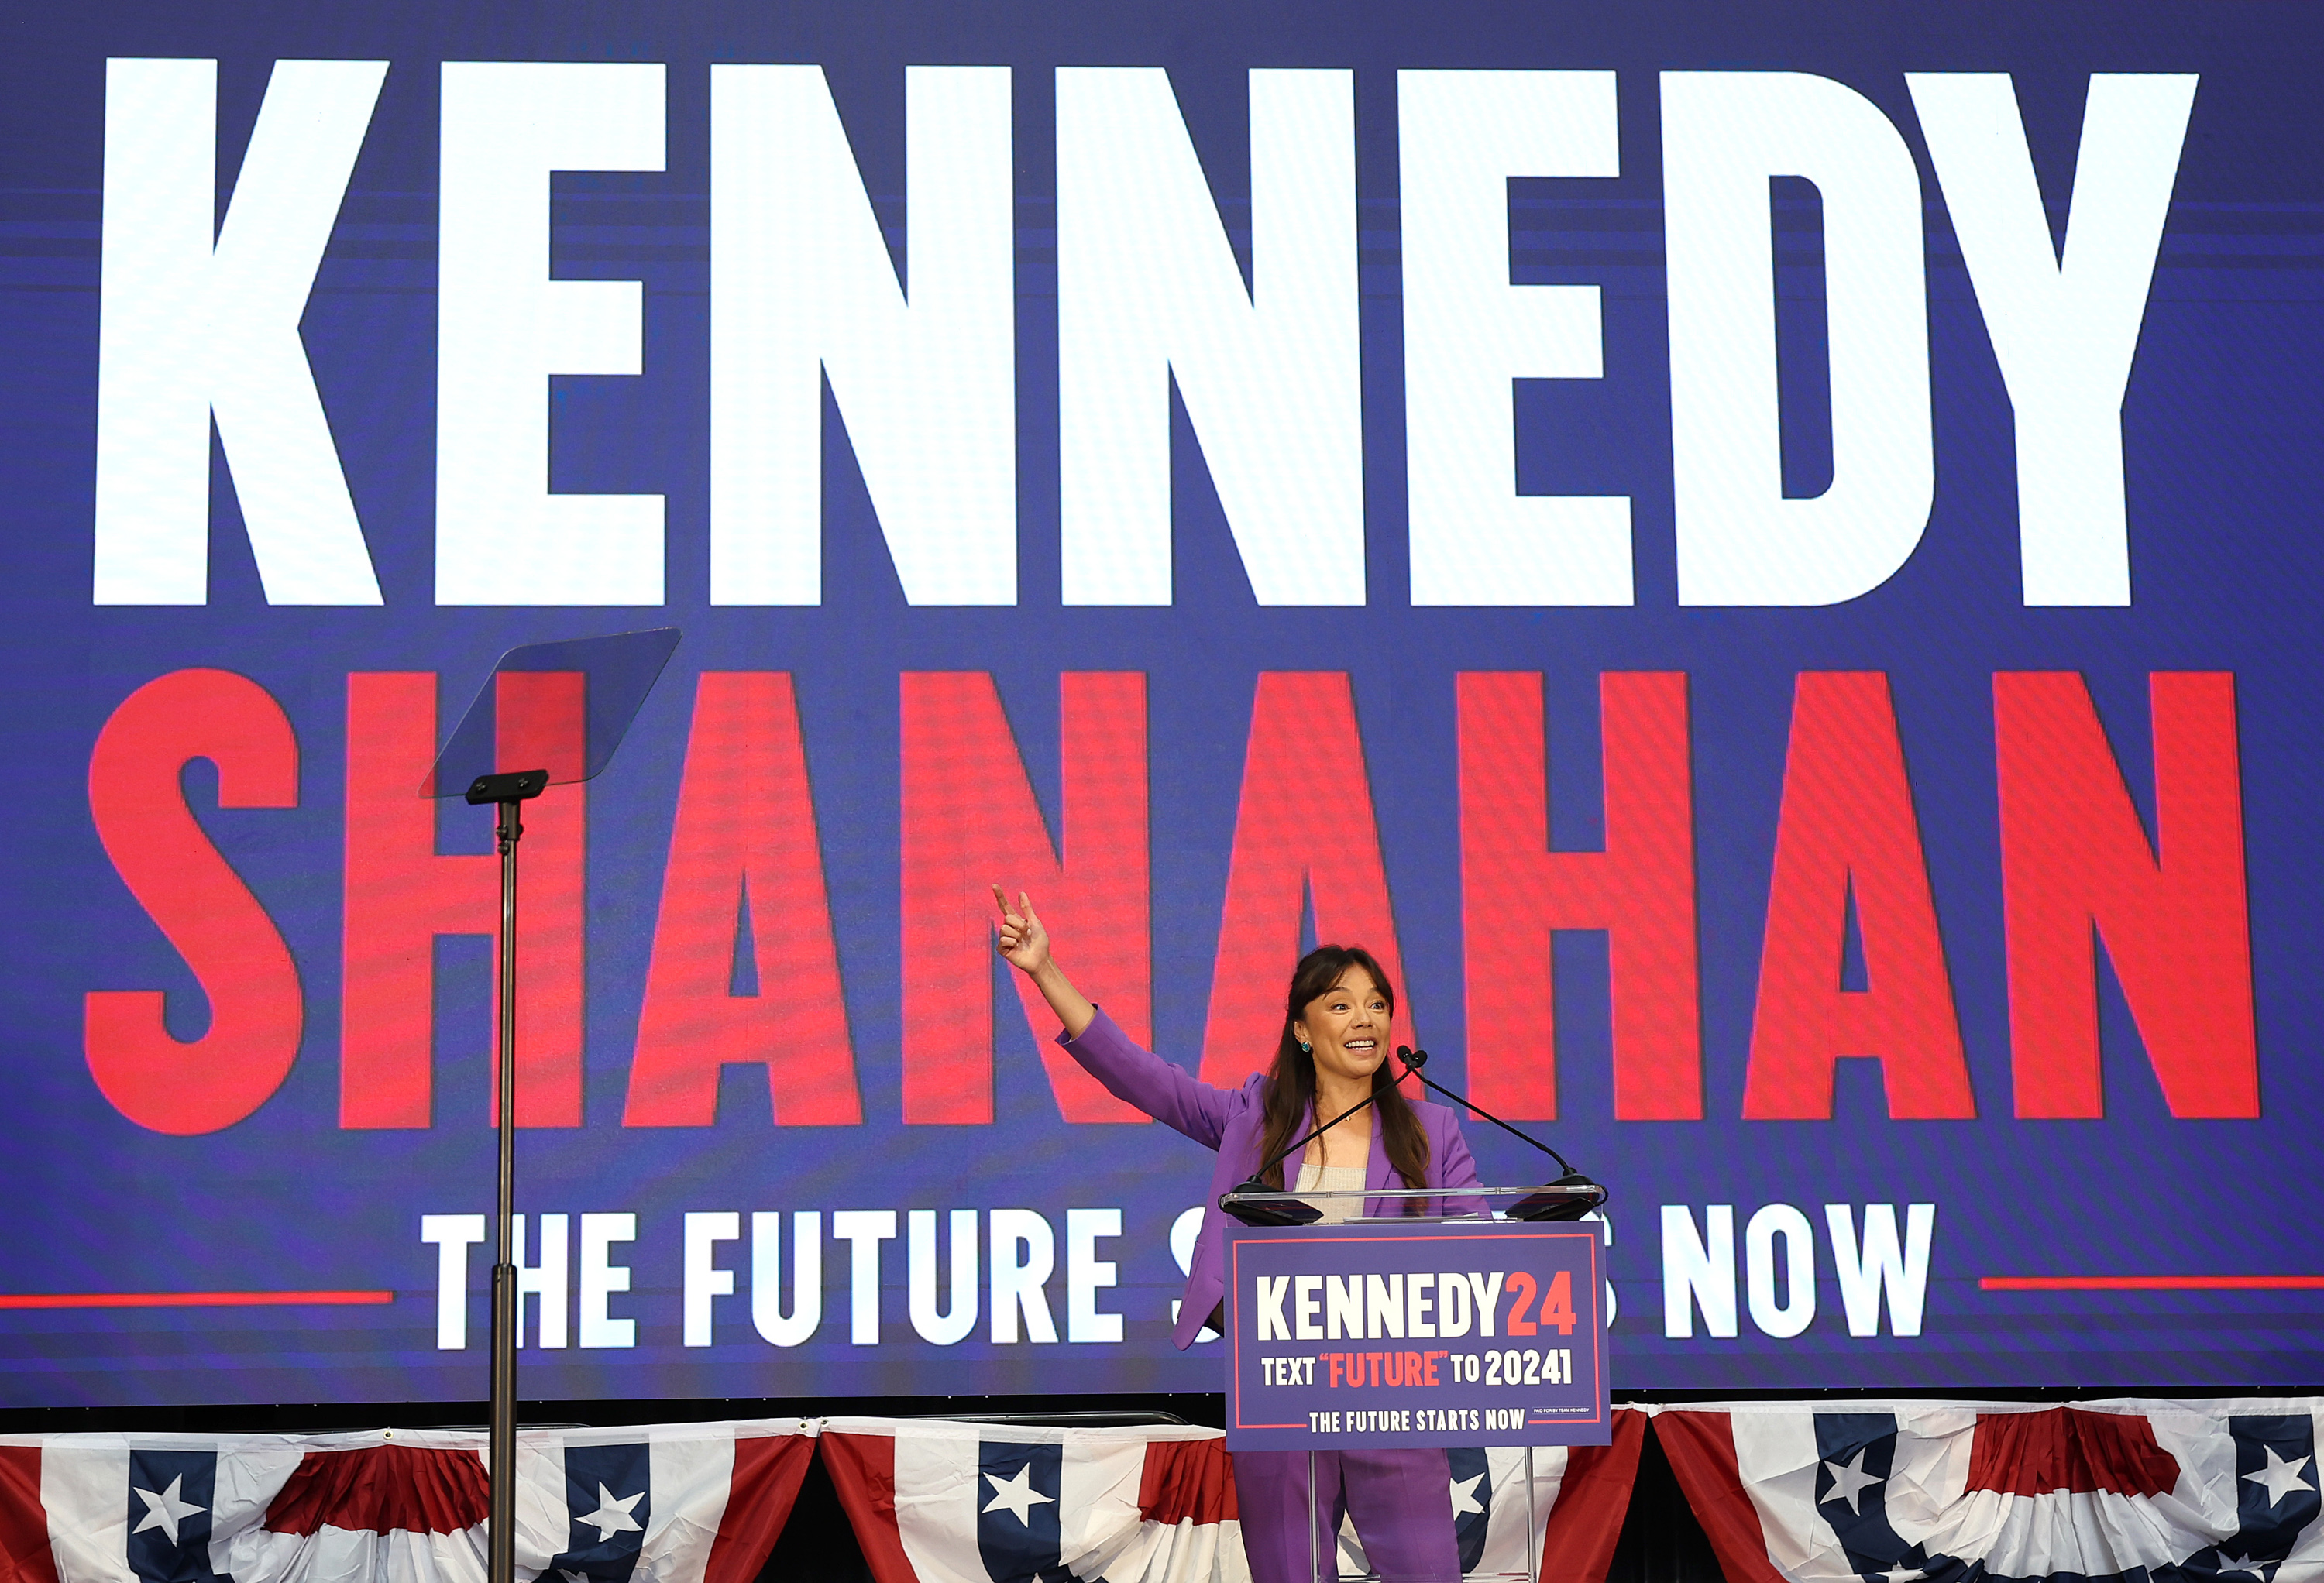 forget kennedy democrats. here comes the 2024 kennedy voter.